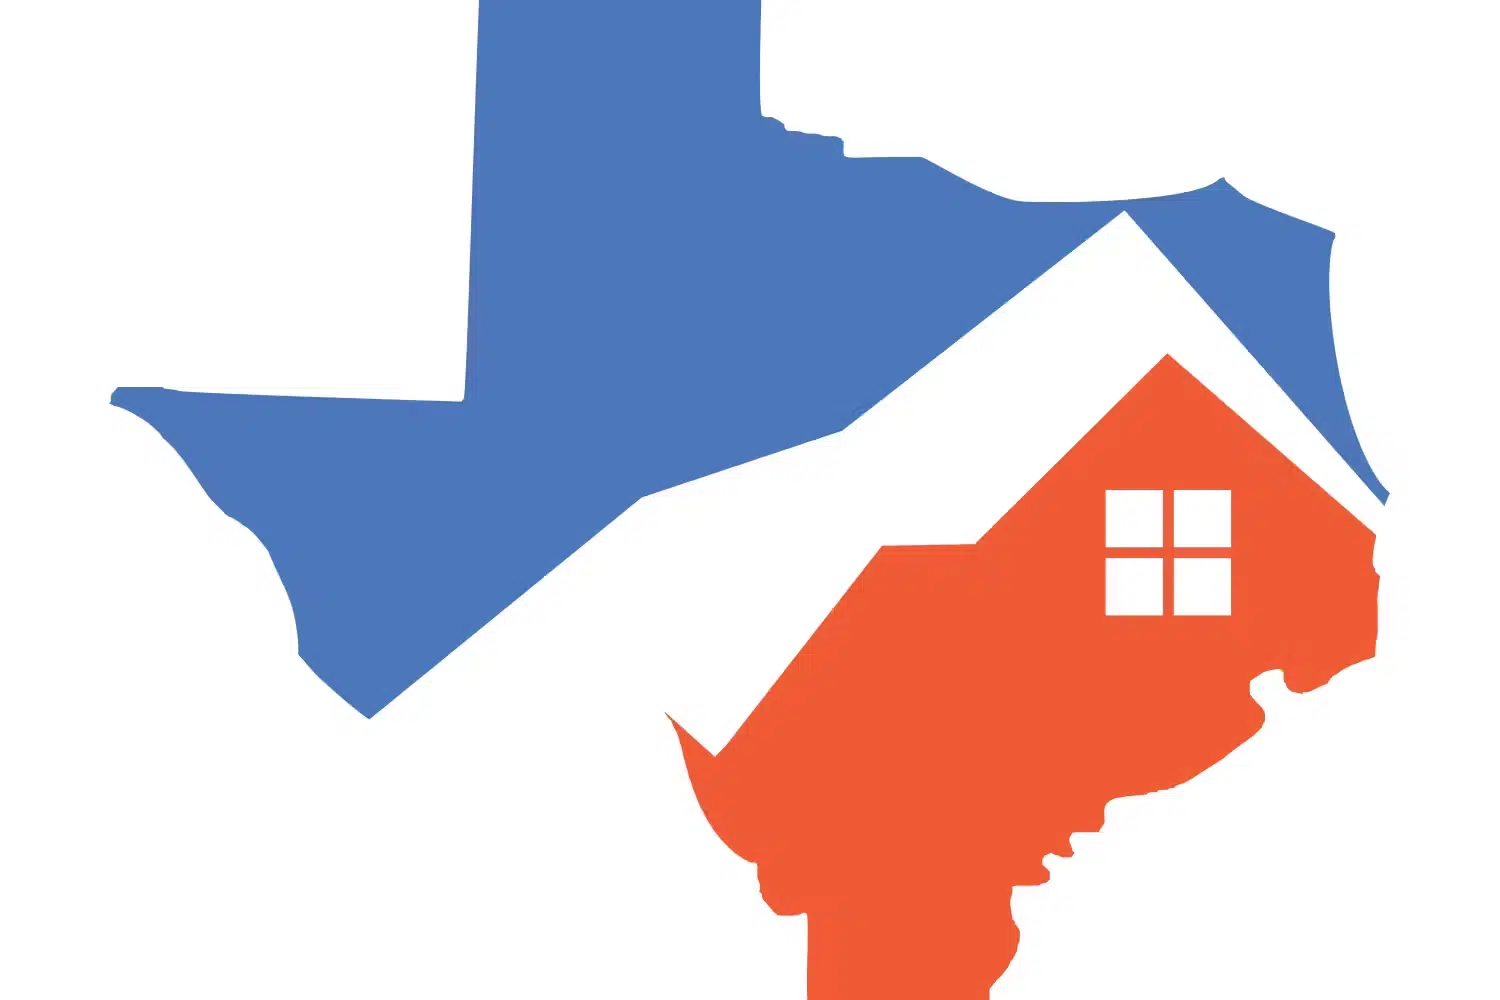 Texas outline cut in half, red and blue colors